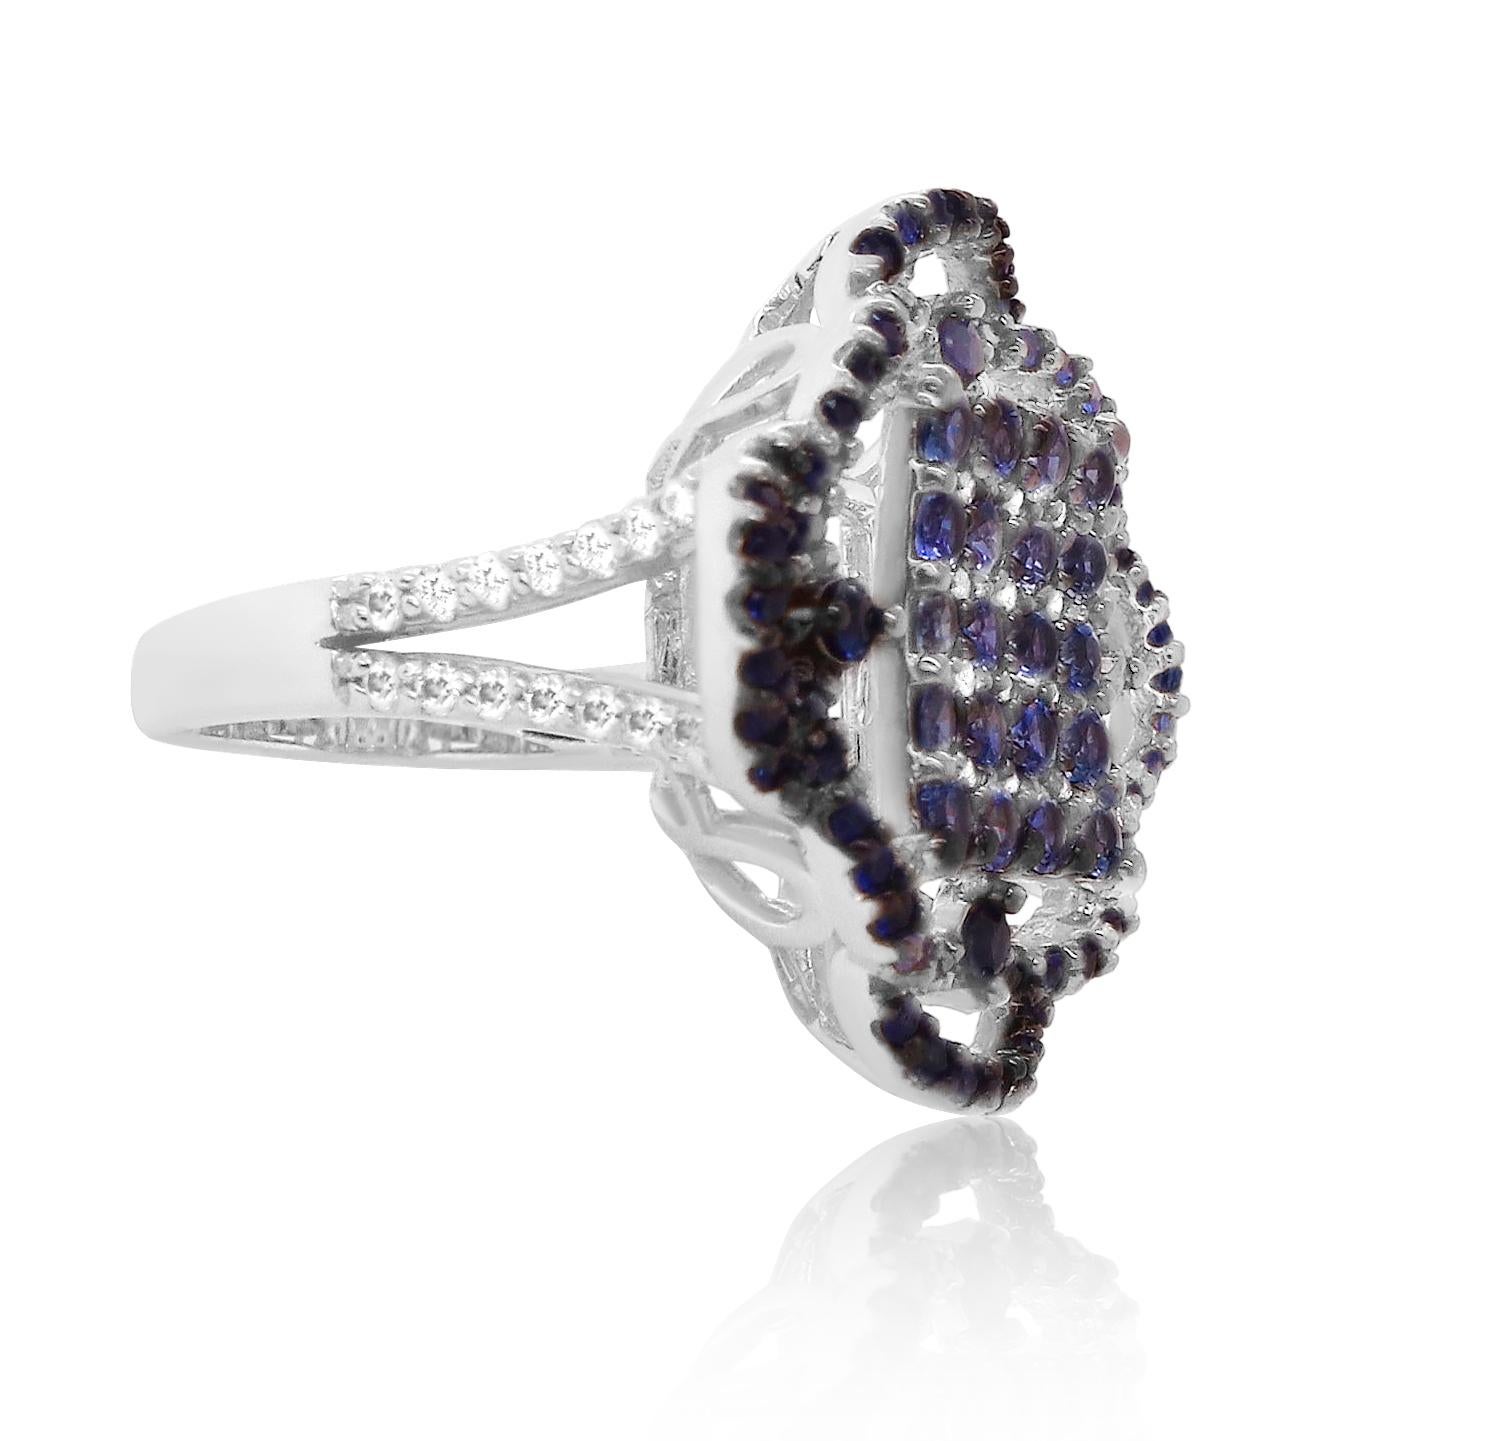 Material: 14k White Gold
Gemstones: 64 Round Blue Sapphires at 0.86 Carats
Stone Details: 9 Blue Sapphires at 1.21 Carats 
Diamond Details: 42 Brilliant Round White Diamonds at 0.35 Carats. SI Clarity / H-I Color. 

Fine one-of-a-kind craftsmanship